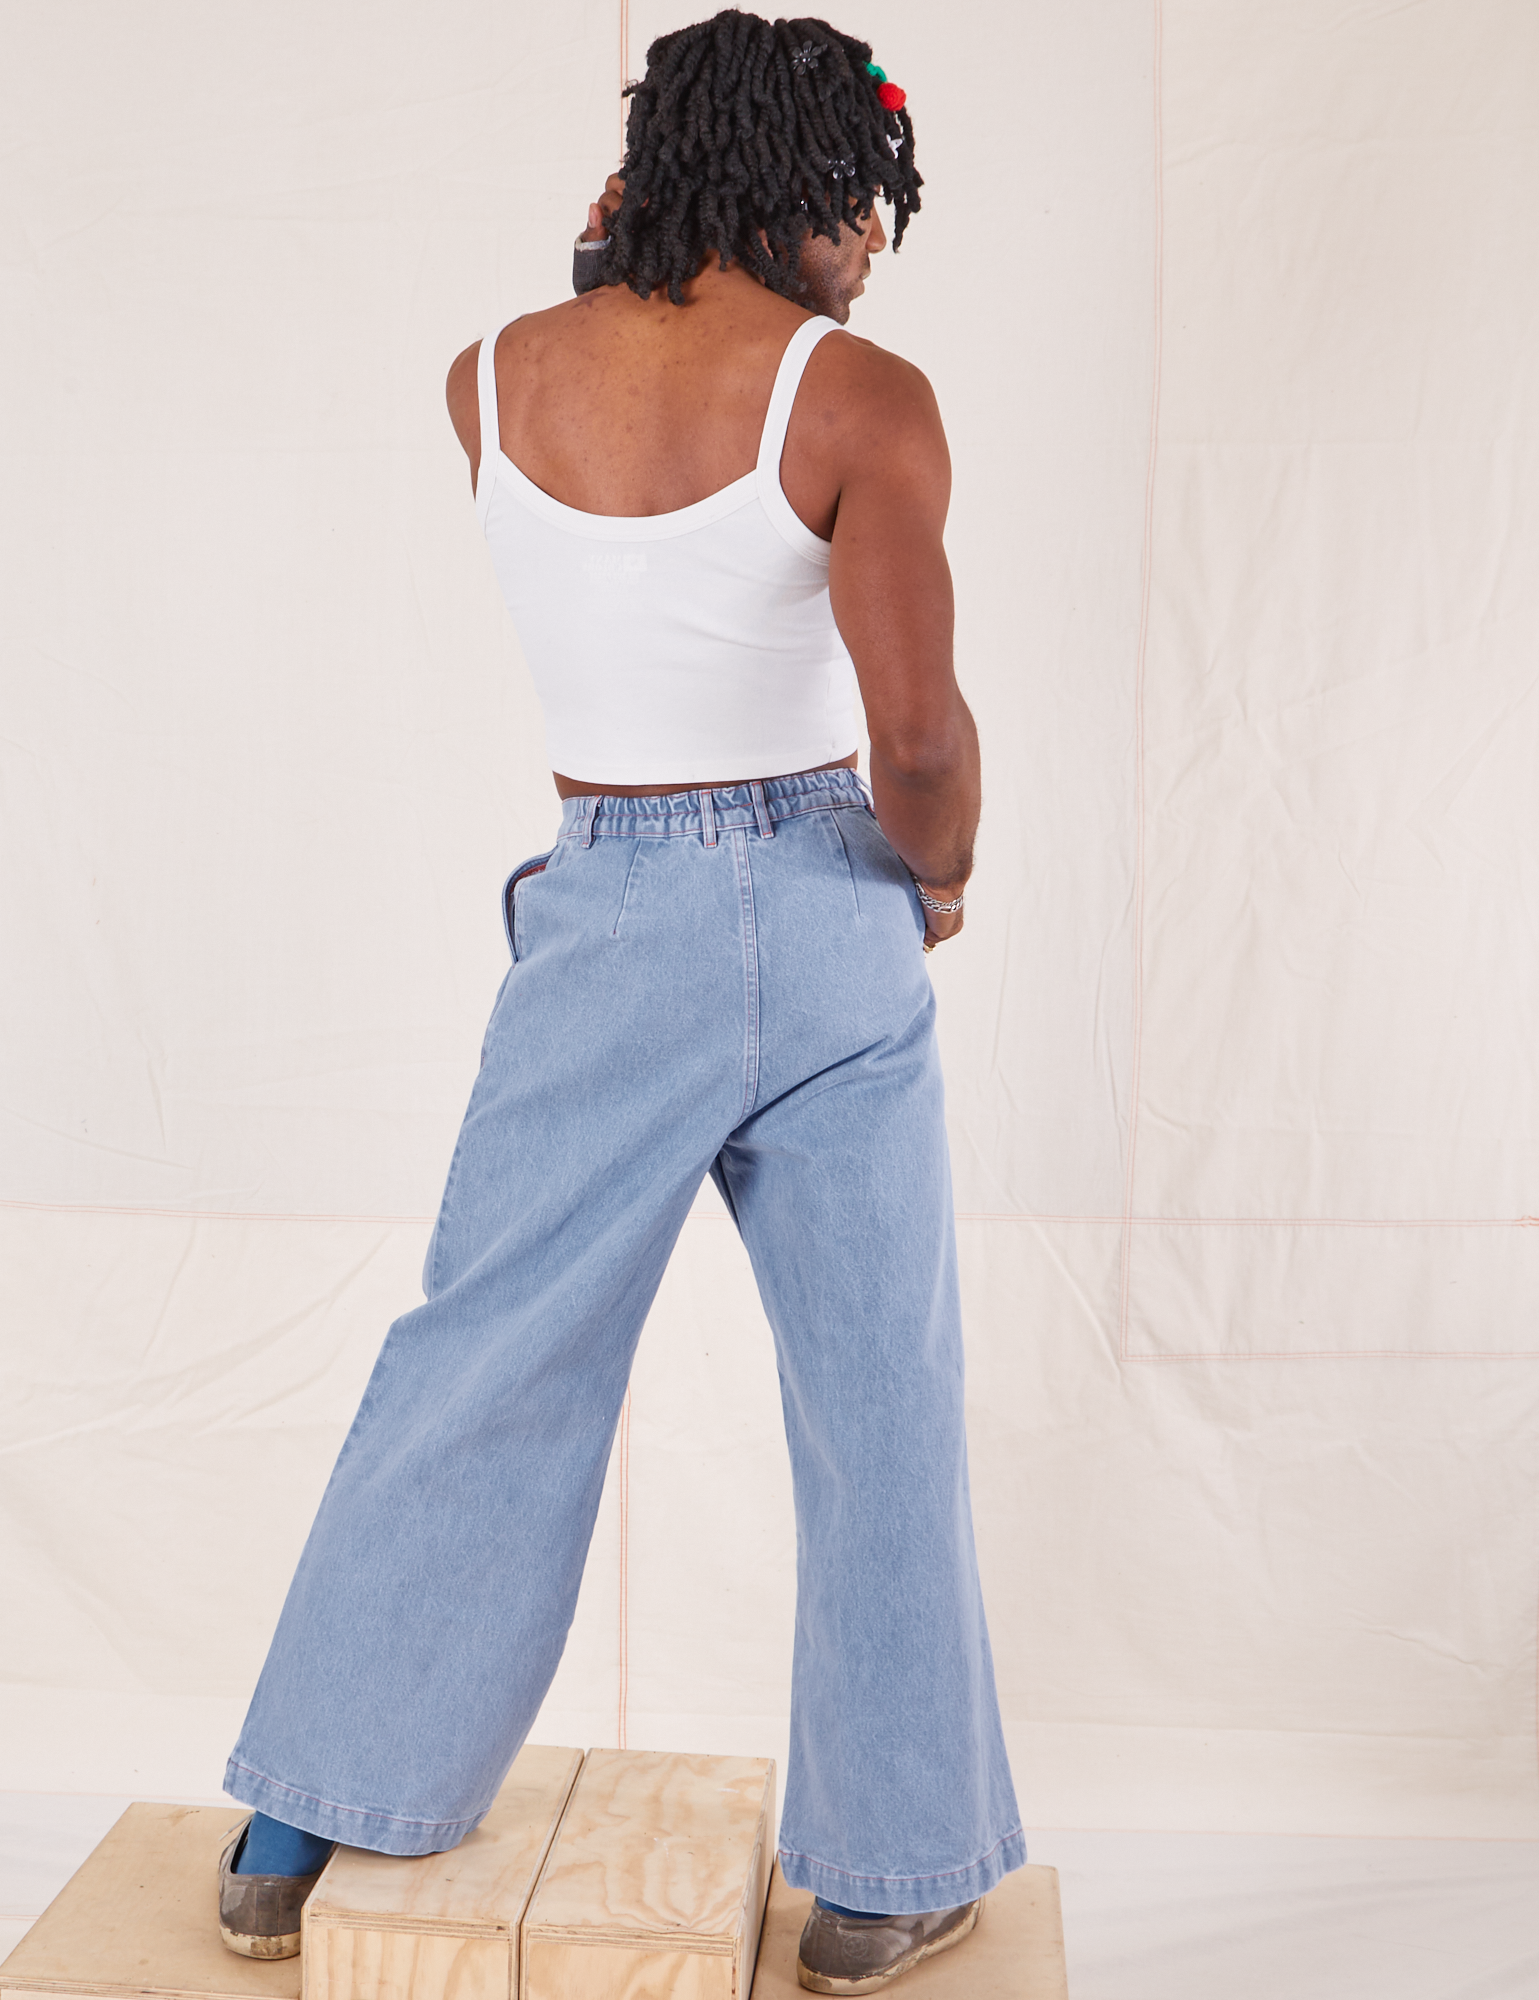 Back view of Indigo Wide Leg Trousers in Light Wash and vintage off-white Cami on Jerrod